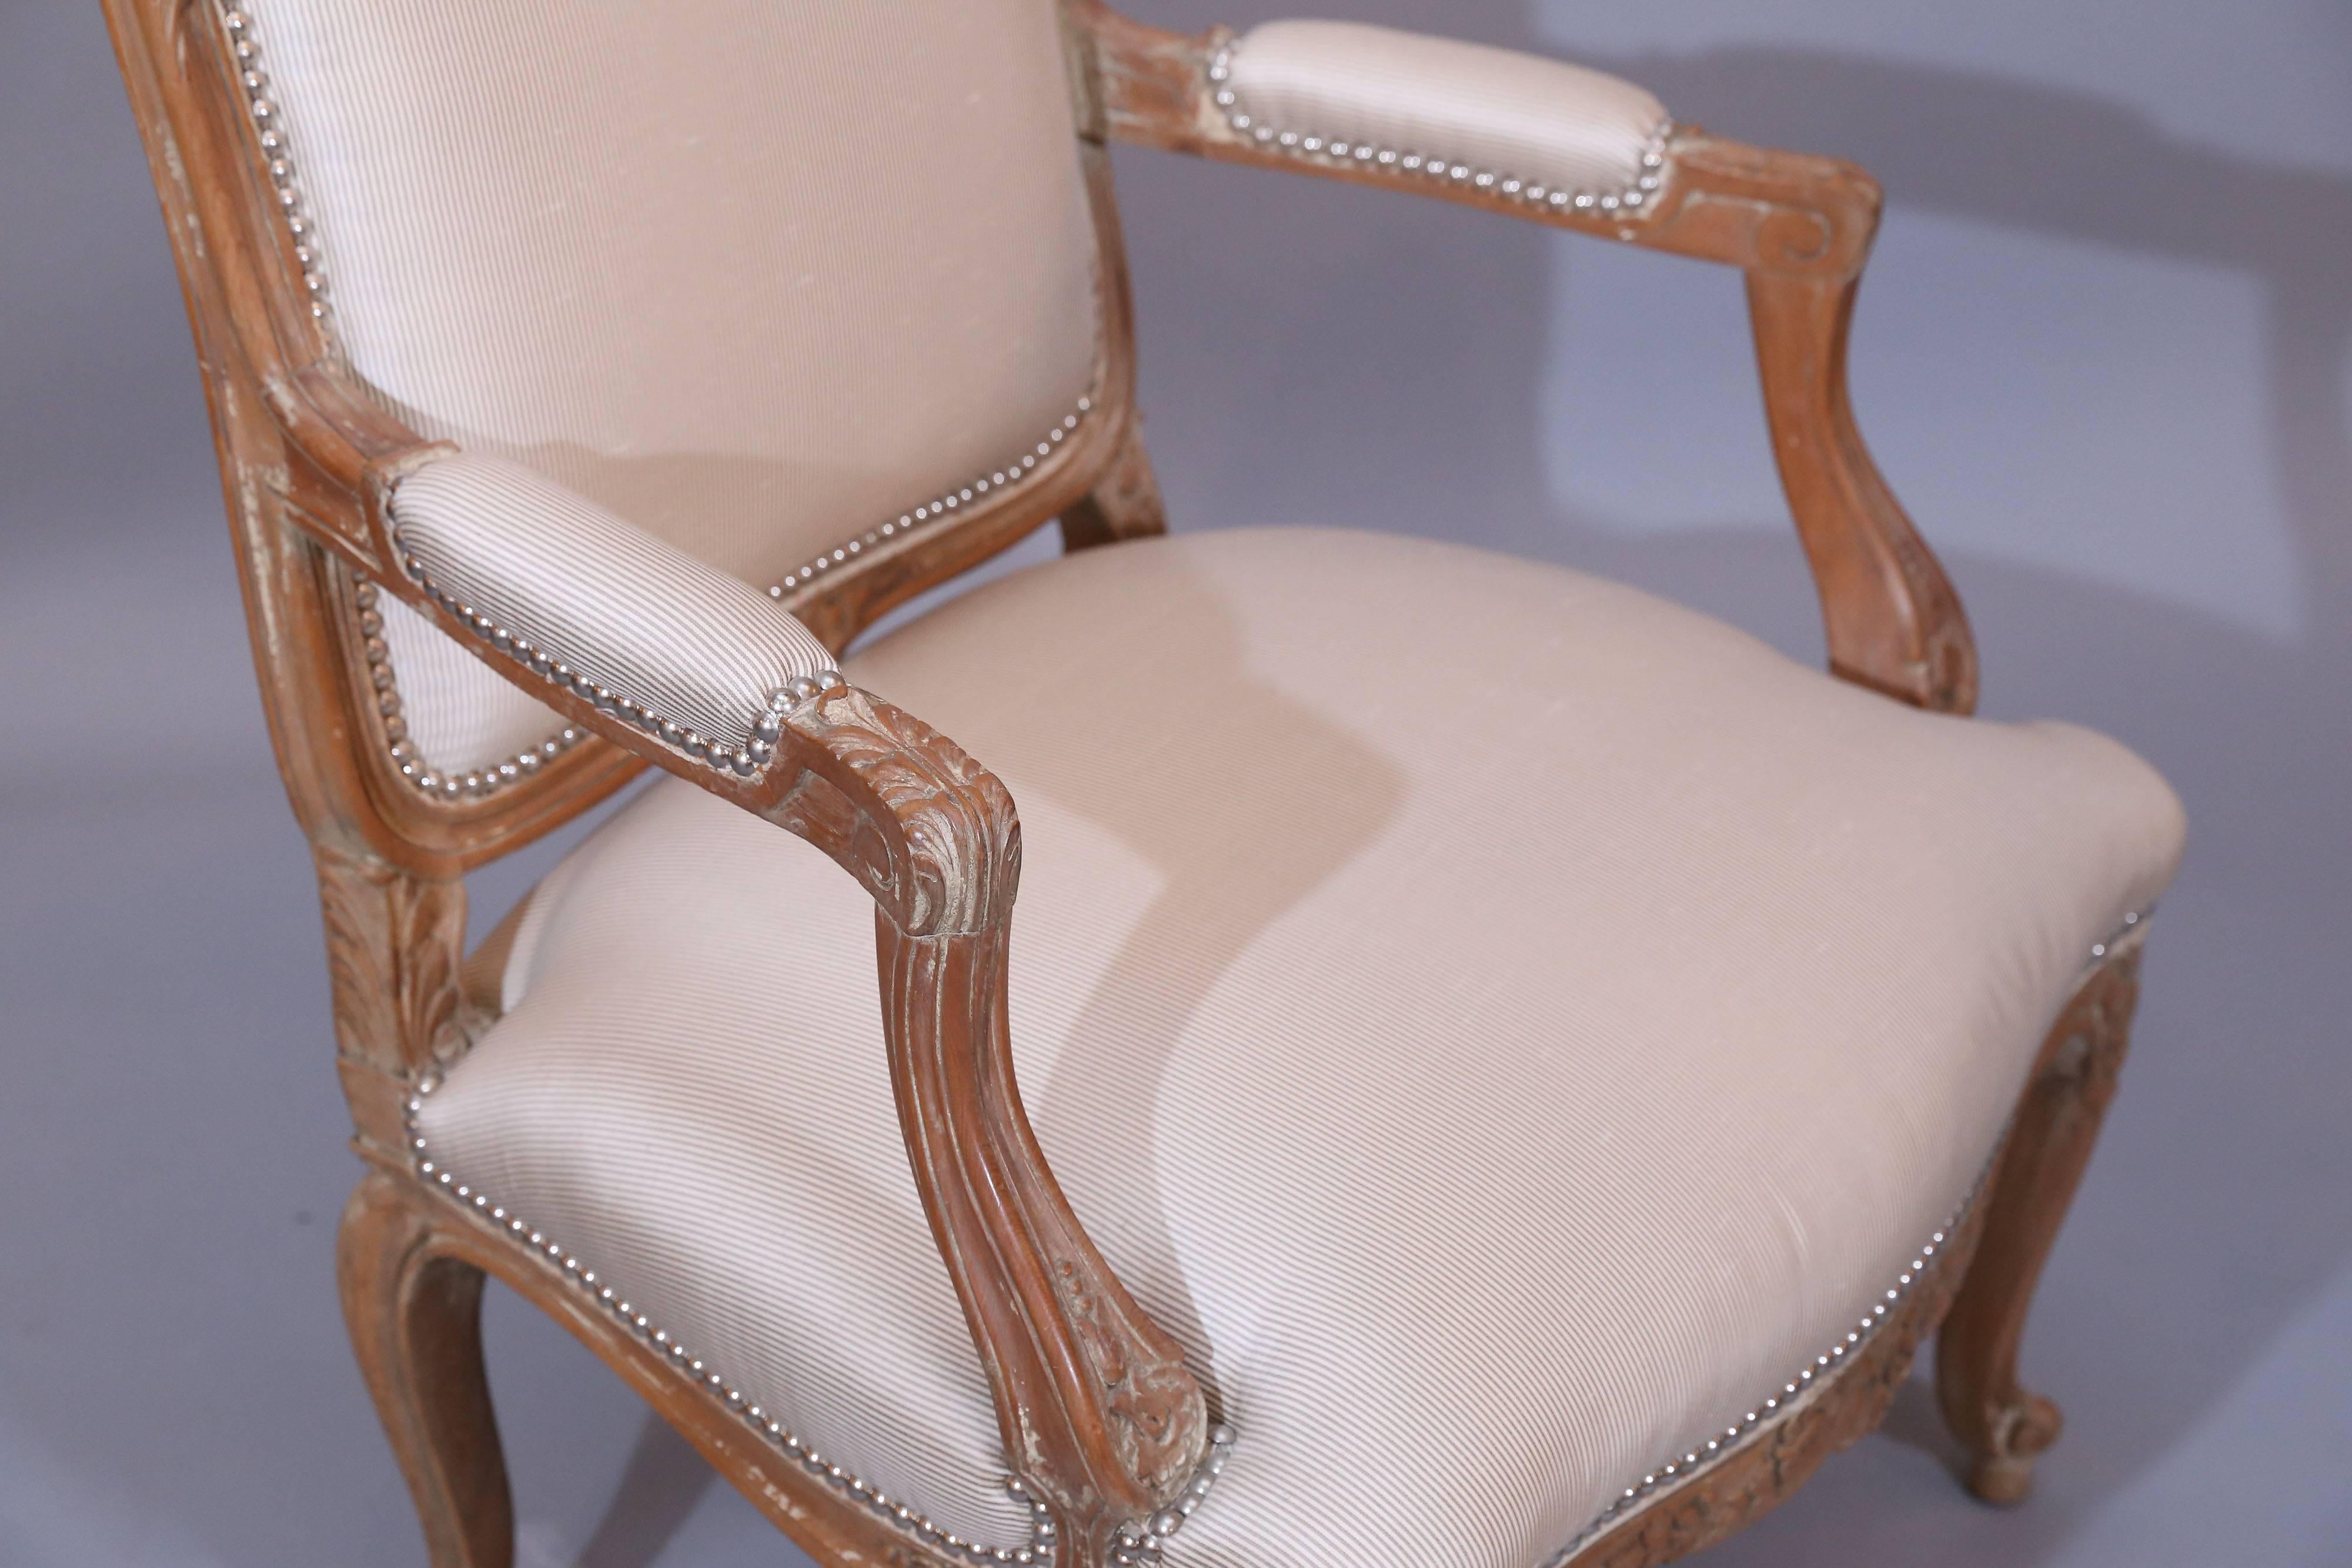 Very handsome reproduction fauteuils with gracefully curved shaping. Chairs have floral carvings on top of back and the apron. Acanthus leaves are
carved on knees.

Upholstery is a taupe and cream thin stripe silk finished in
nailhead trim.